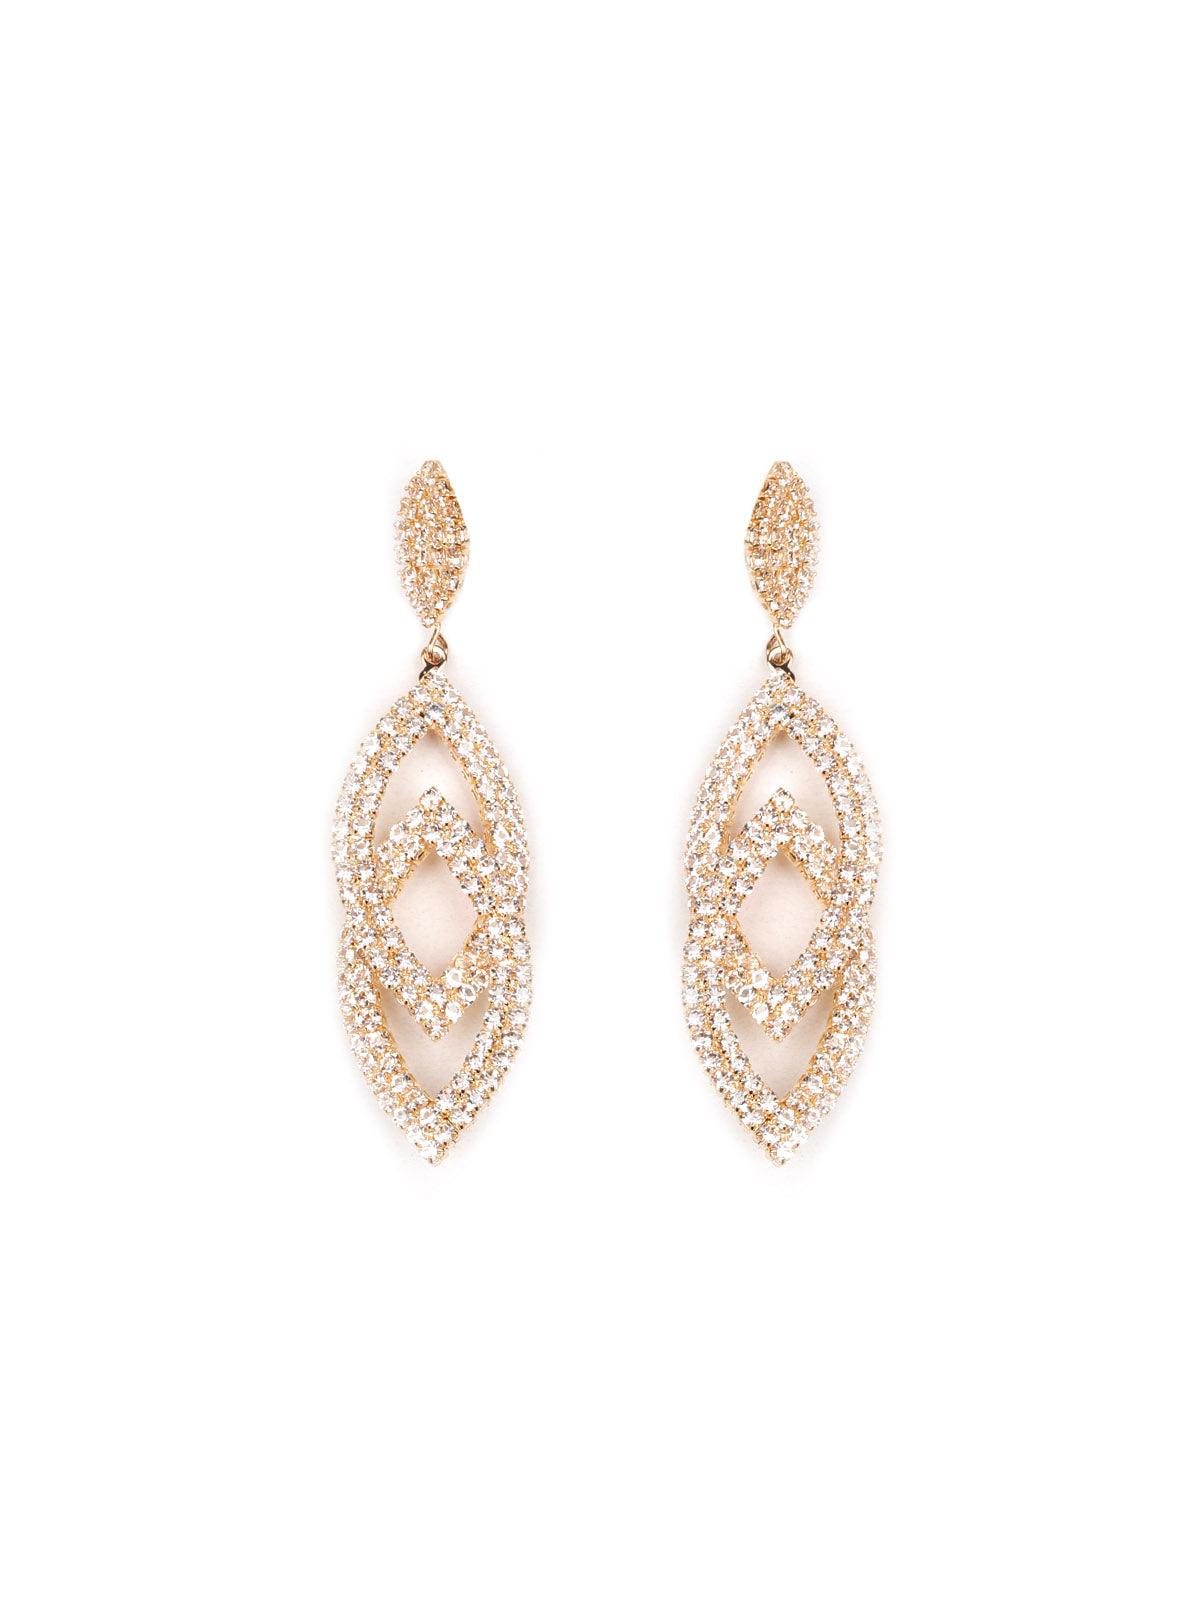 Women's Gold-Tone Studded Overlapping Gorgeous Statement Earrings - Odette